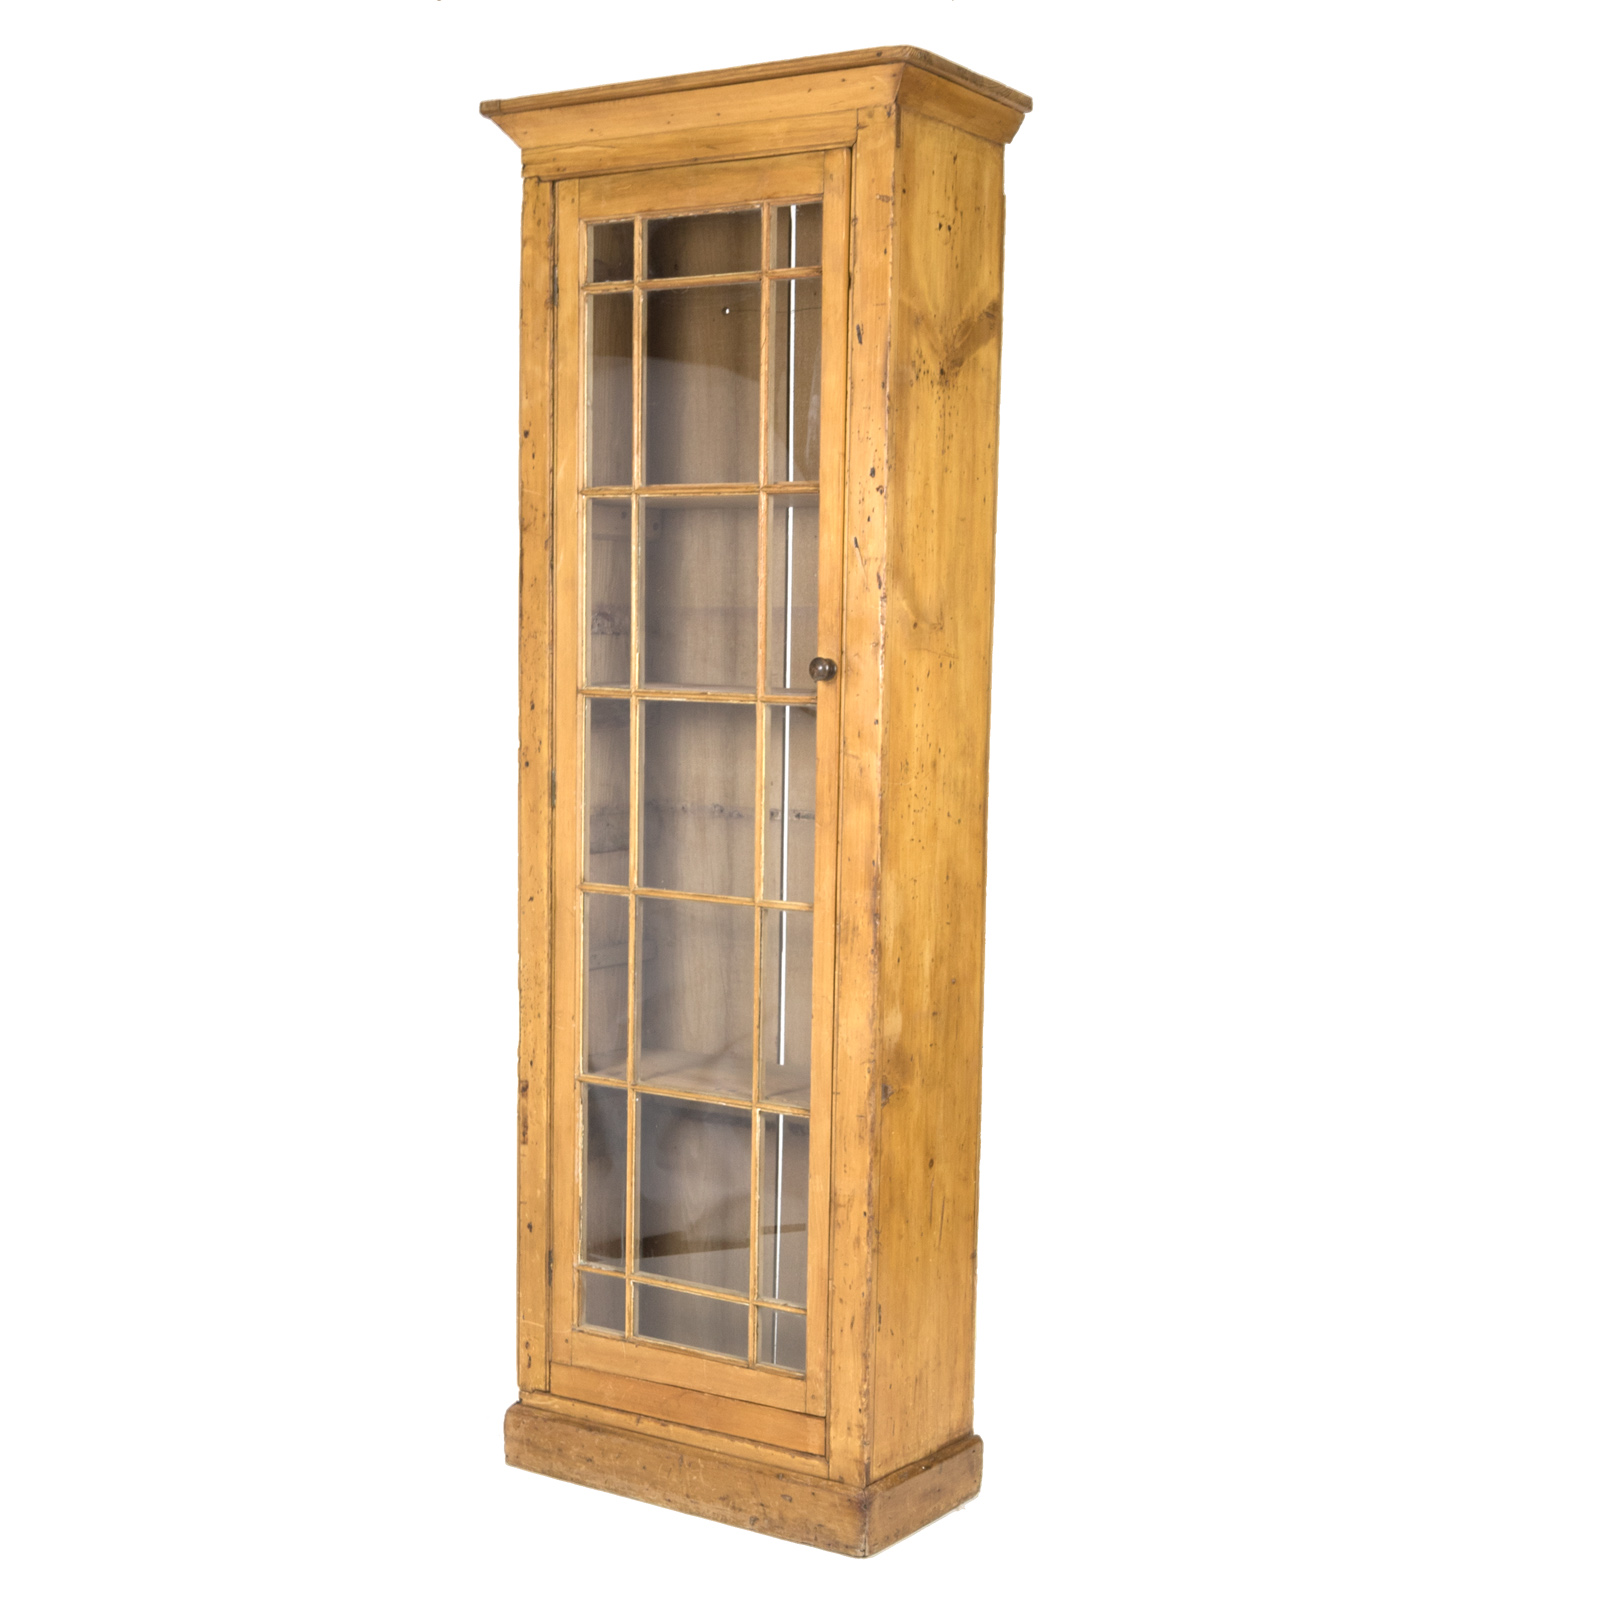 Vintage Narrow Pine Display Cabinet, Narrow Bookcase With Glass Doors